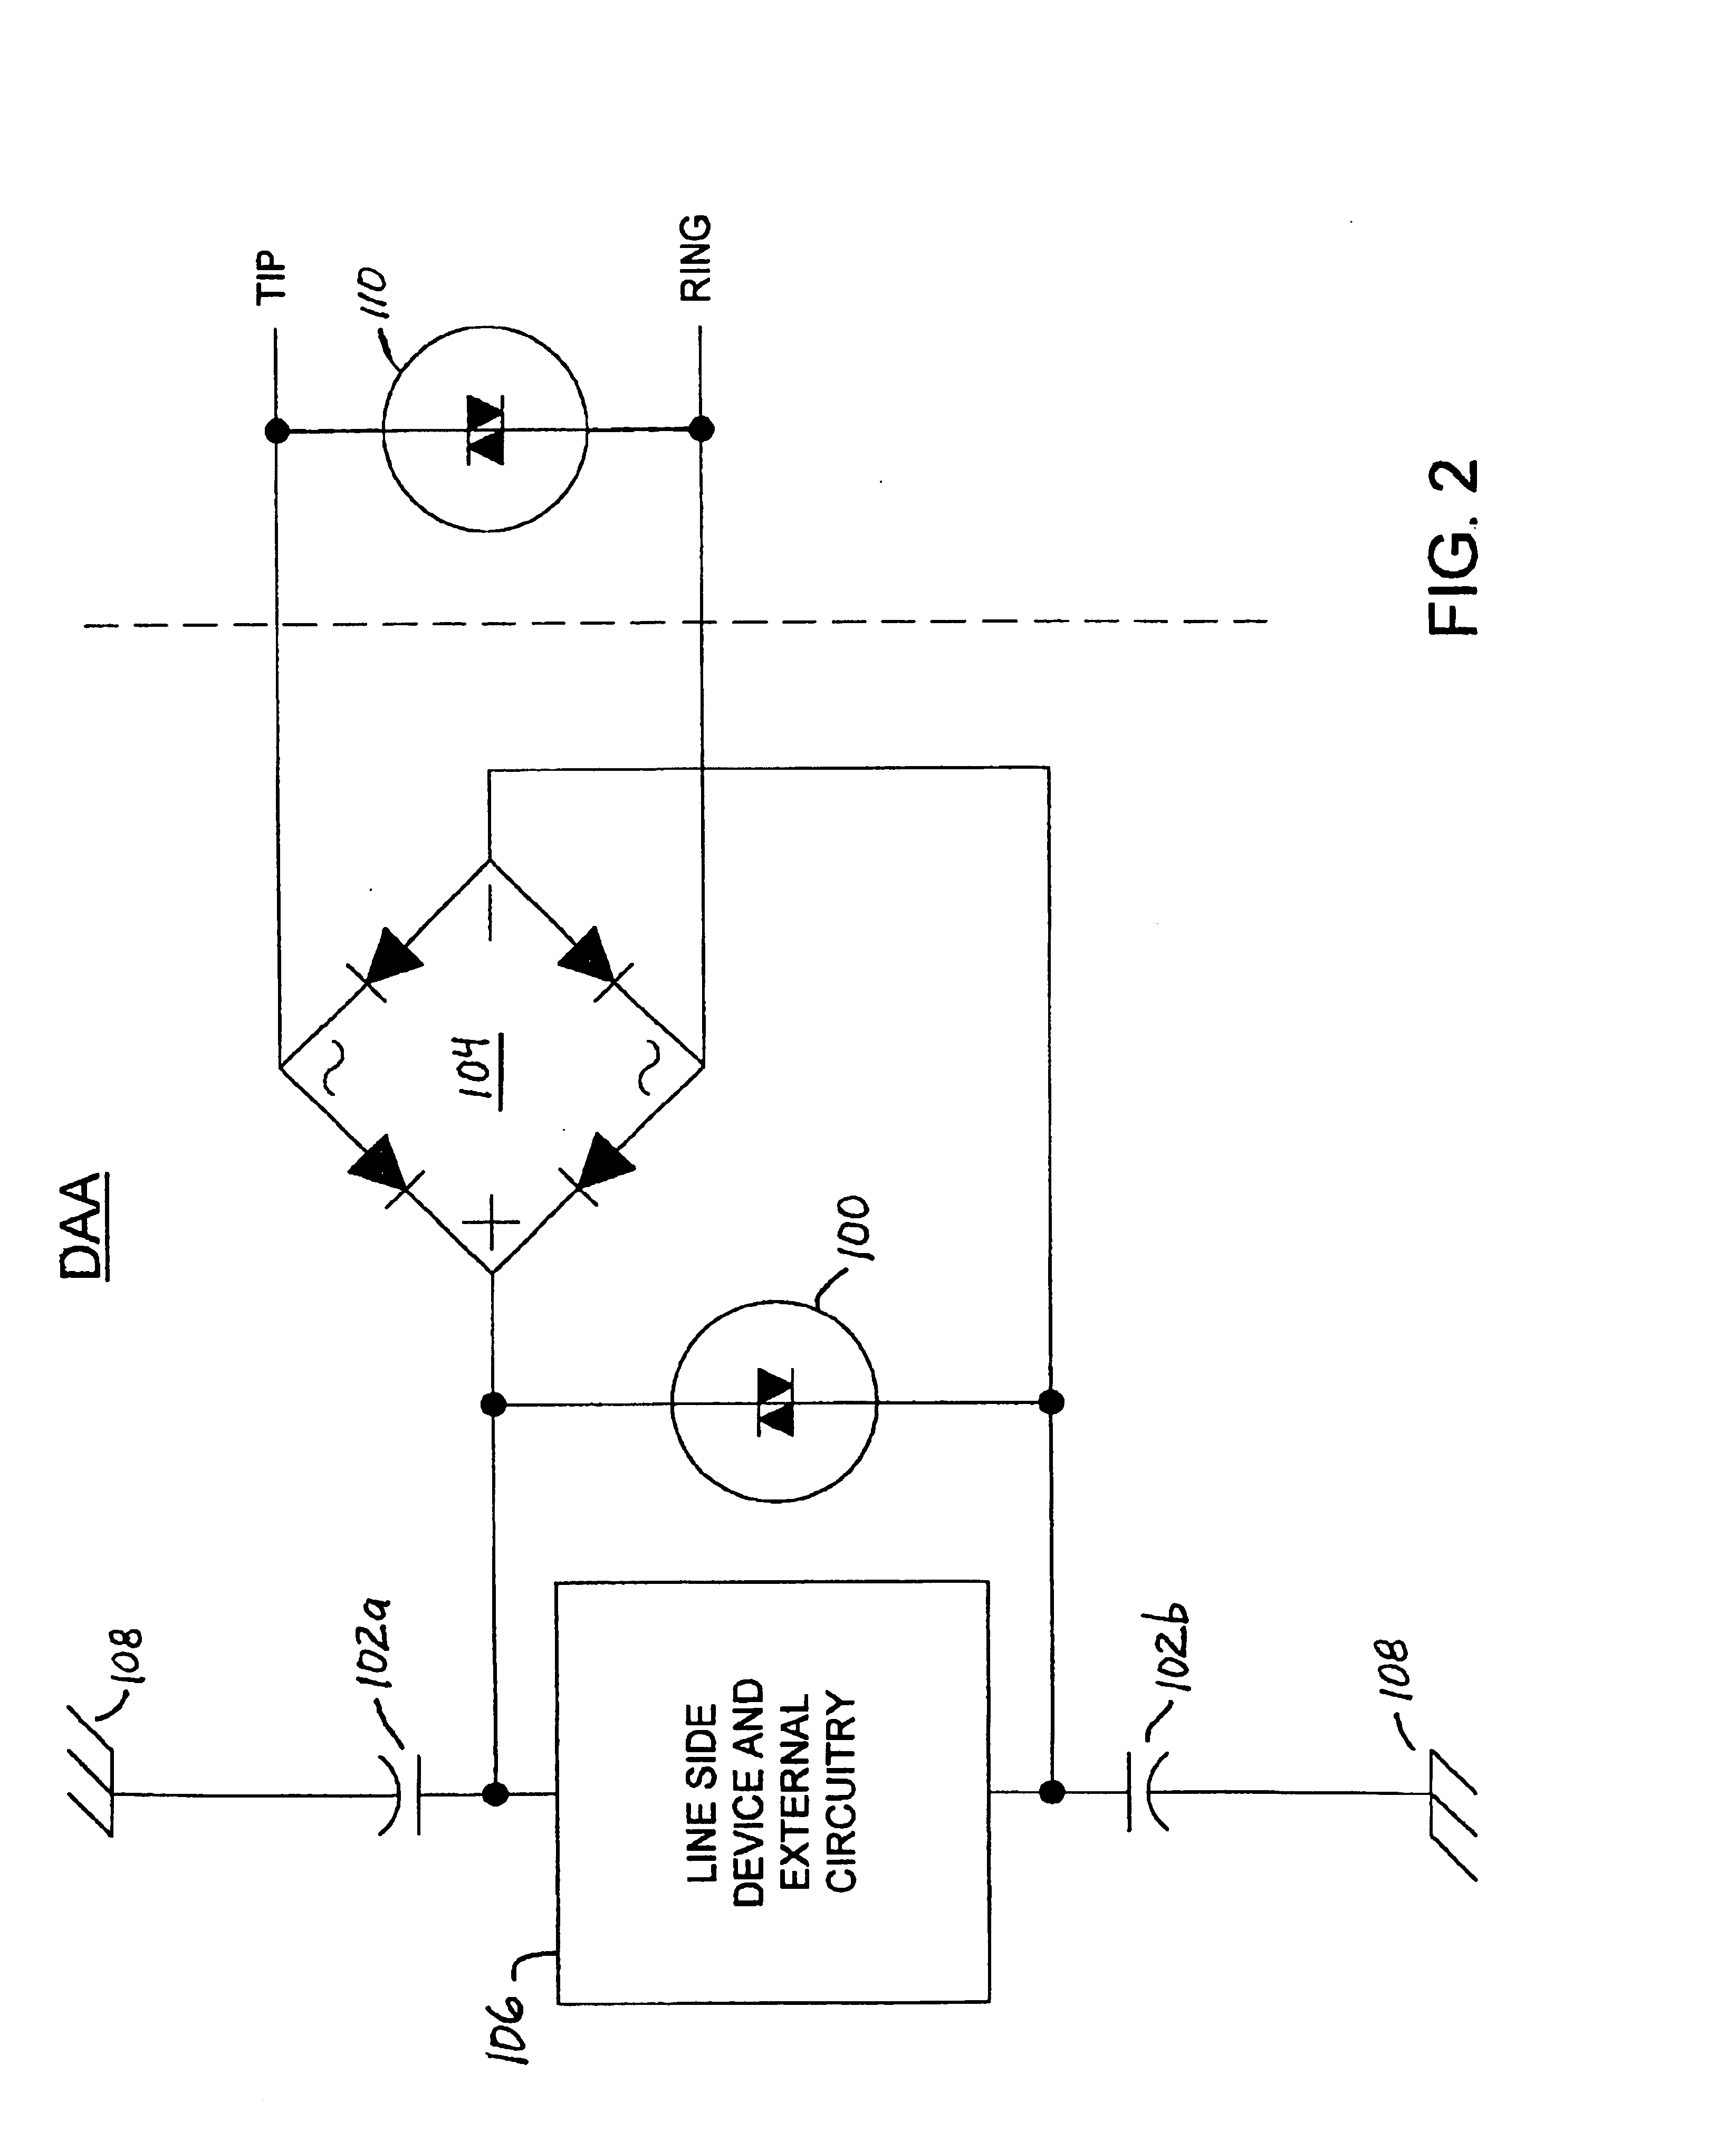 High-voltage protection circuitry in a data access arrangement